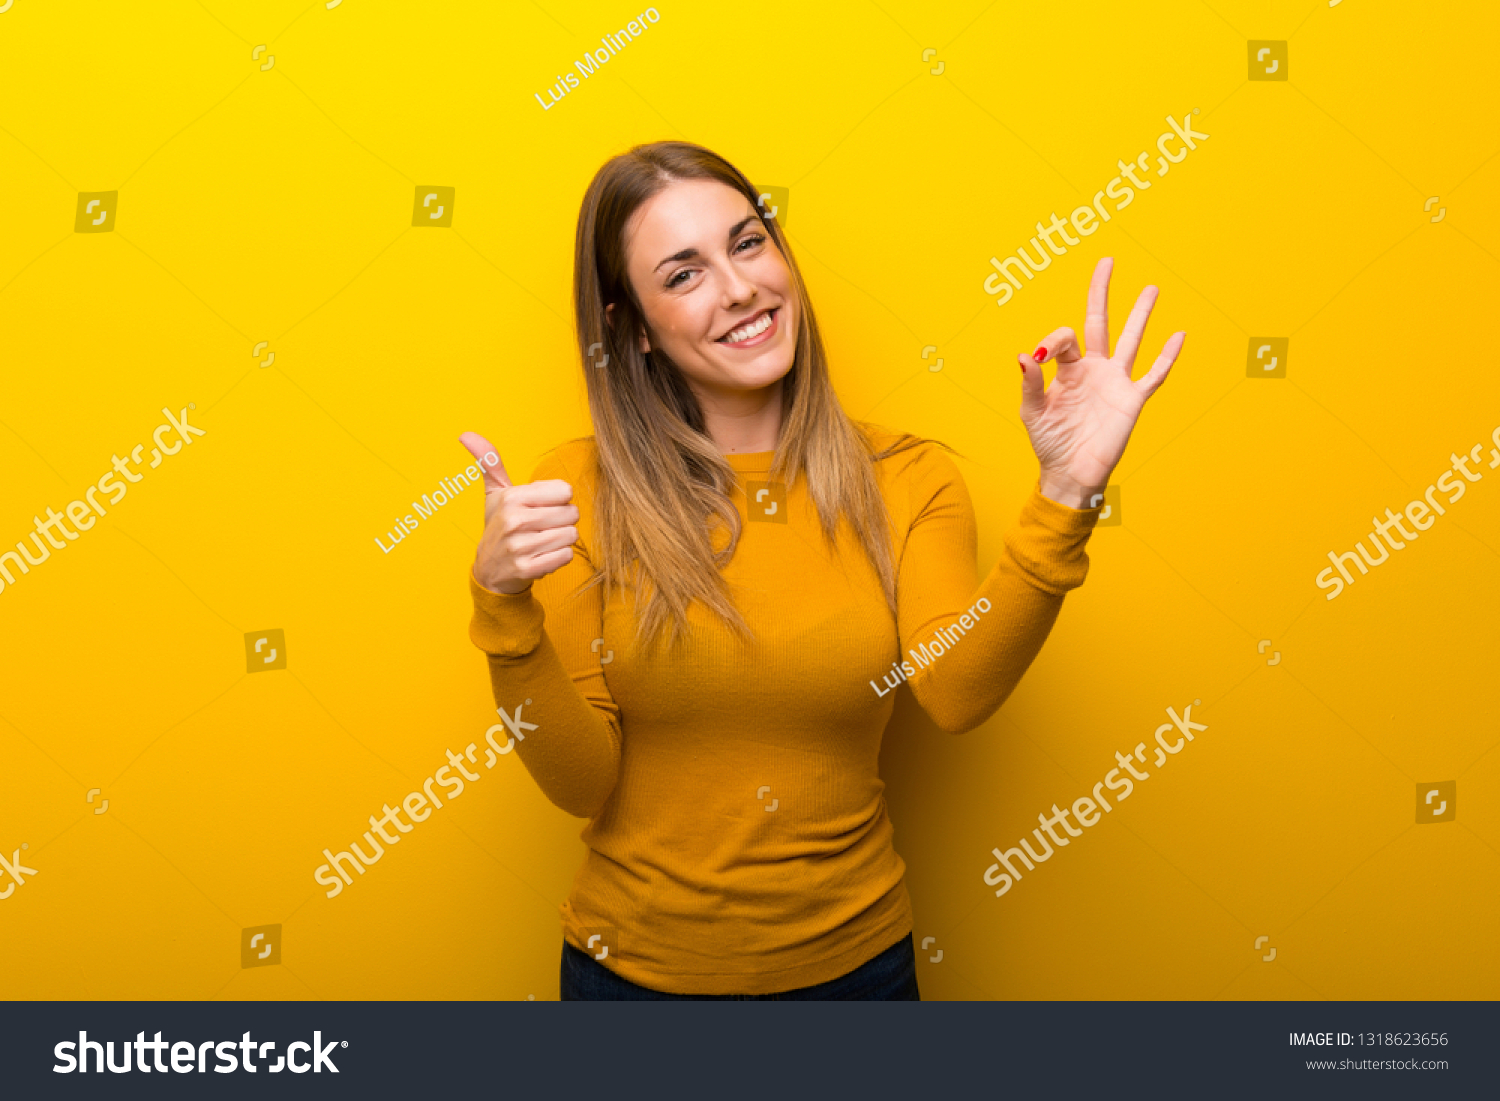 Young woman on yellow background showing ok sign with and giving a thumb up gesture #1318623656